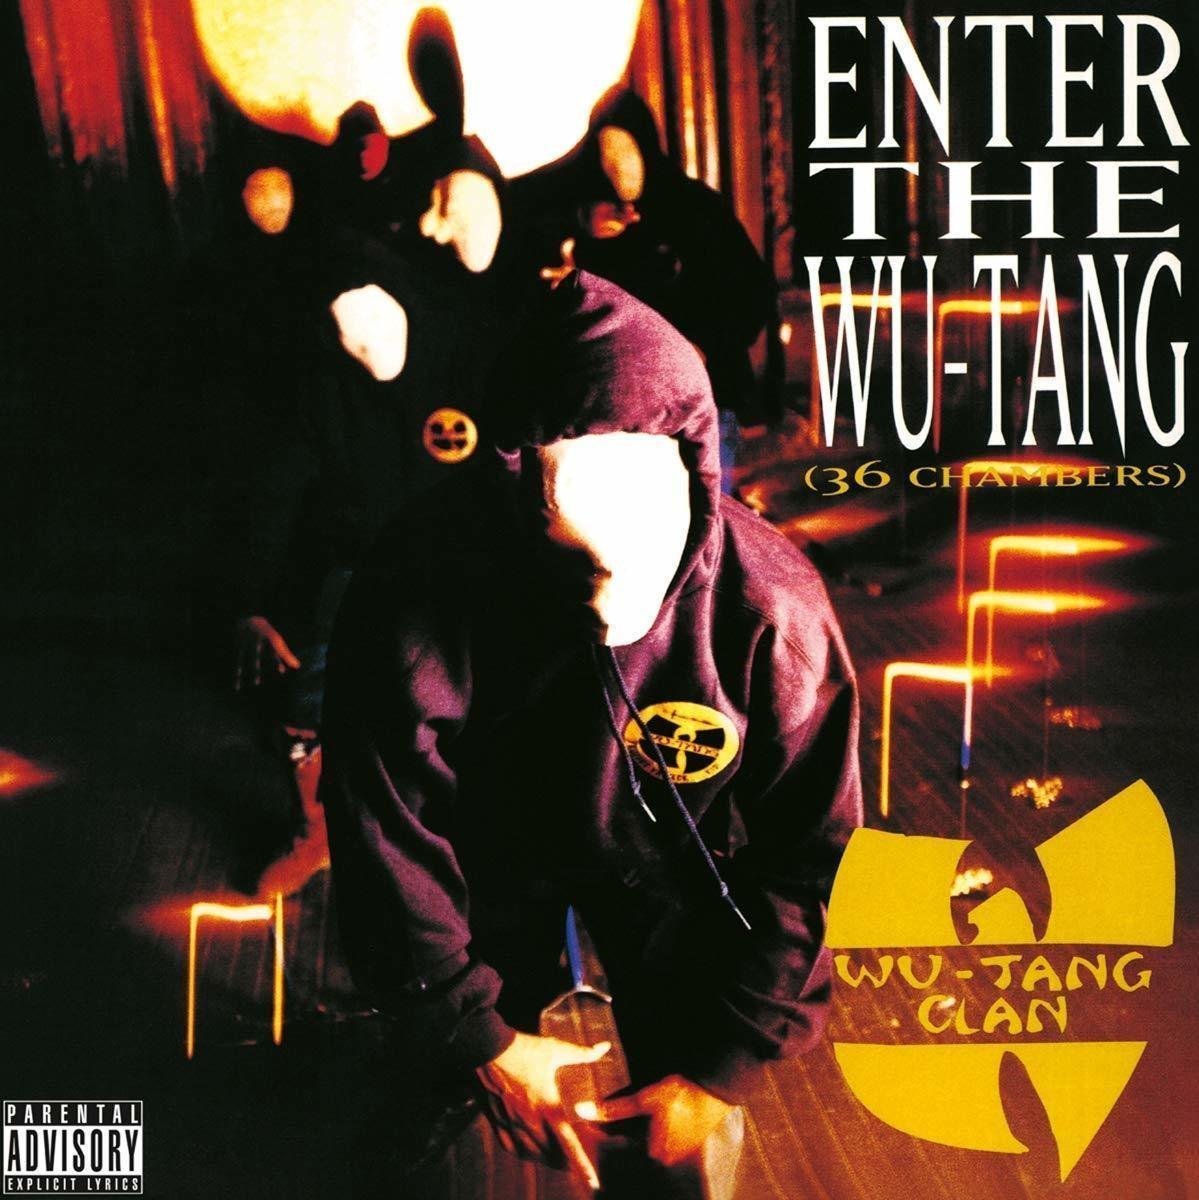 Disque vinyle Wu-Tang Clan - Enter the Wu-Tang Clan (36 Chambers) (Yellow Coloured) (LP)